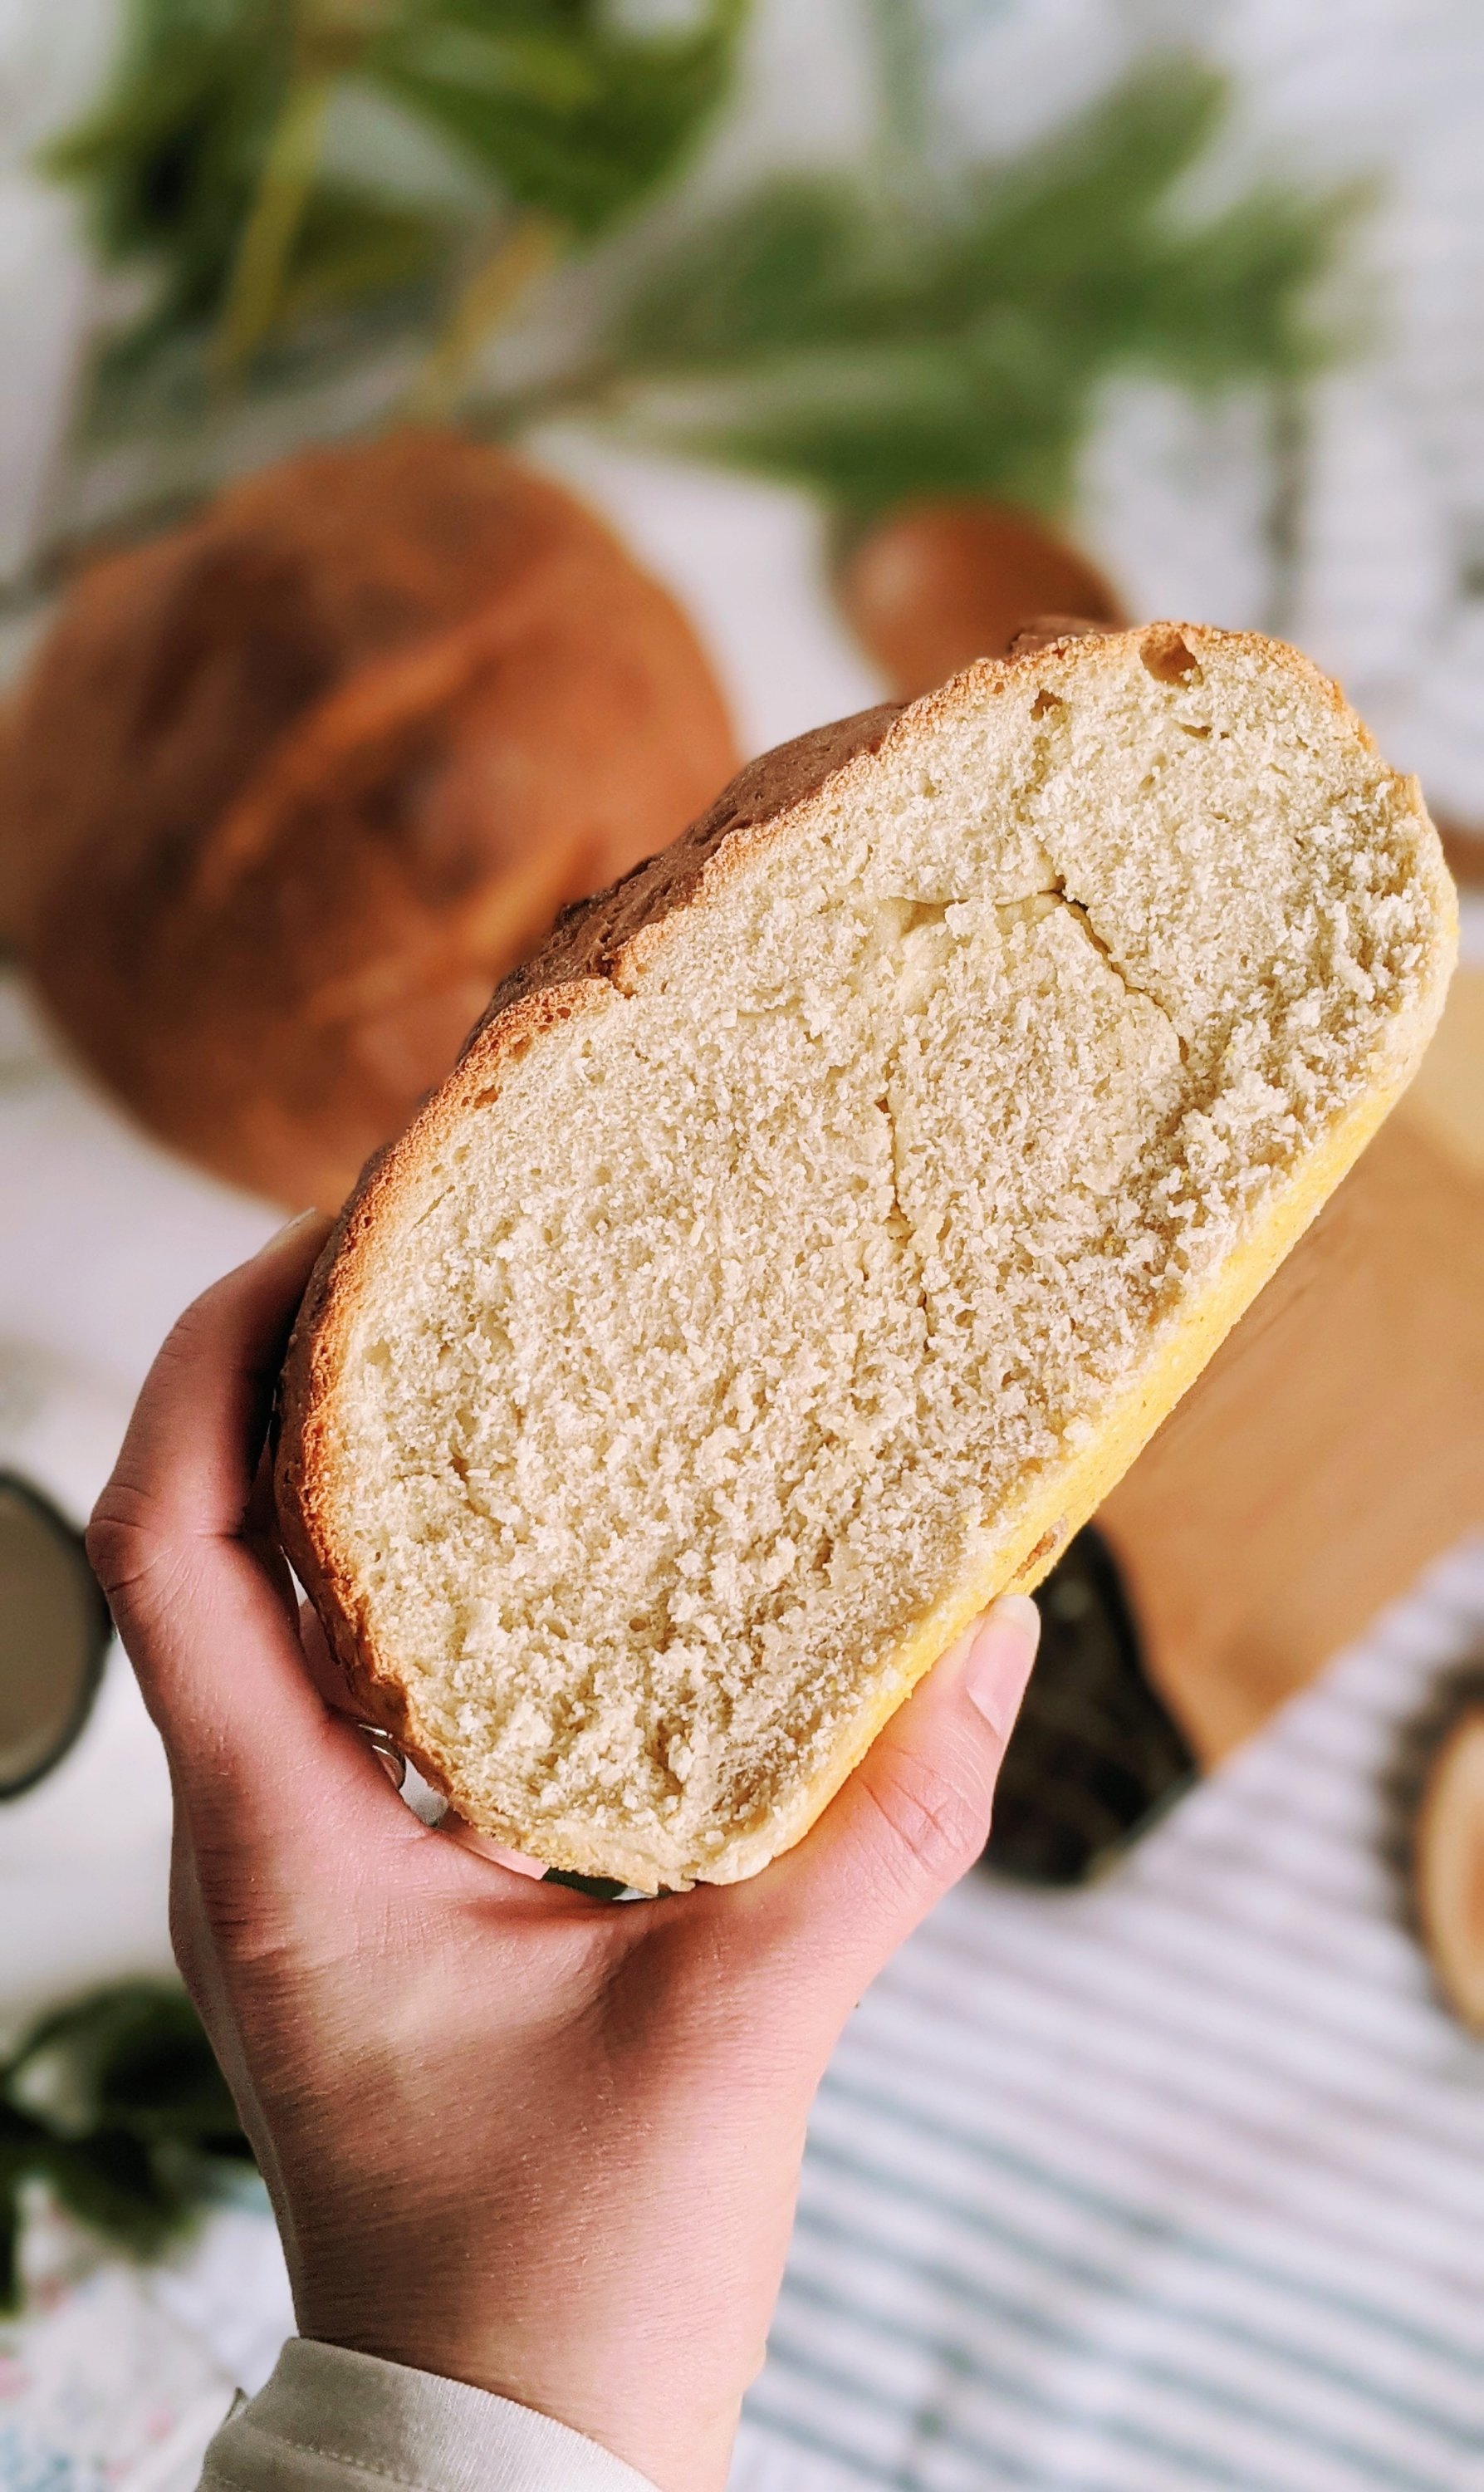 homemade bread recipe with cornmeal on the bottom vegan dairy free no eggs healthy plant based bread simple pantry staple ingredients cheap inexpensive